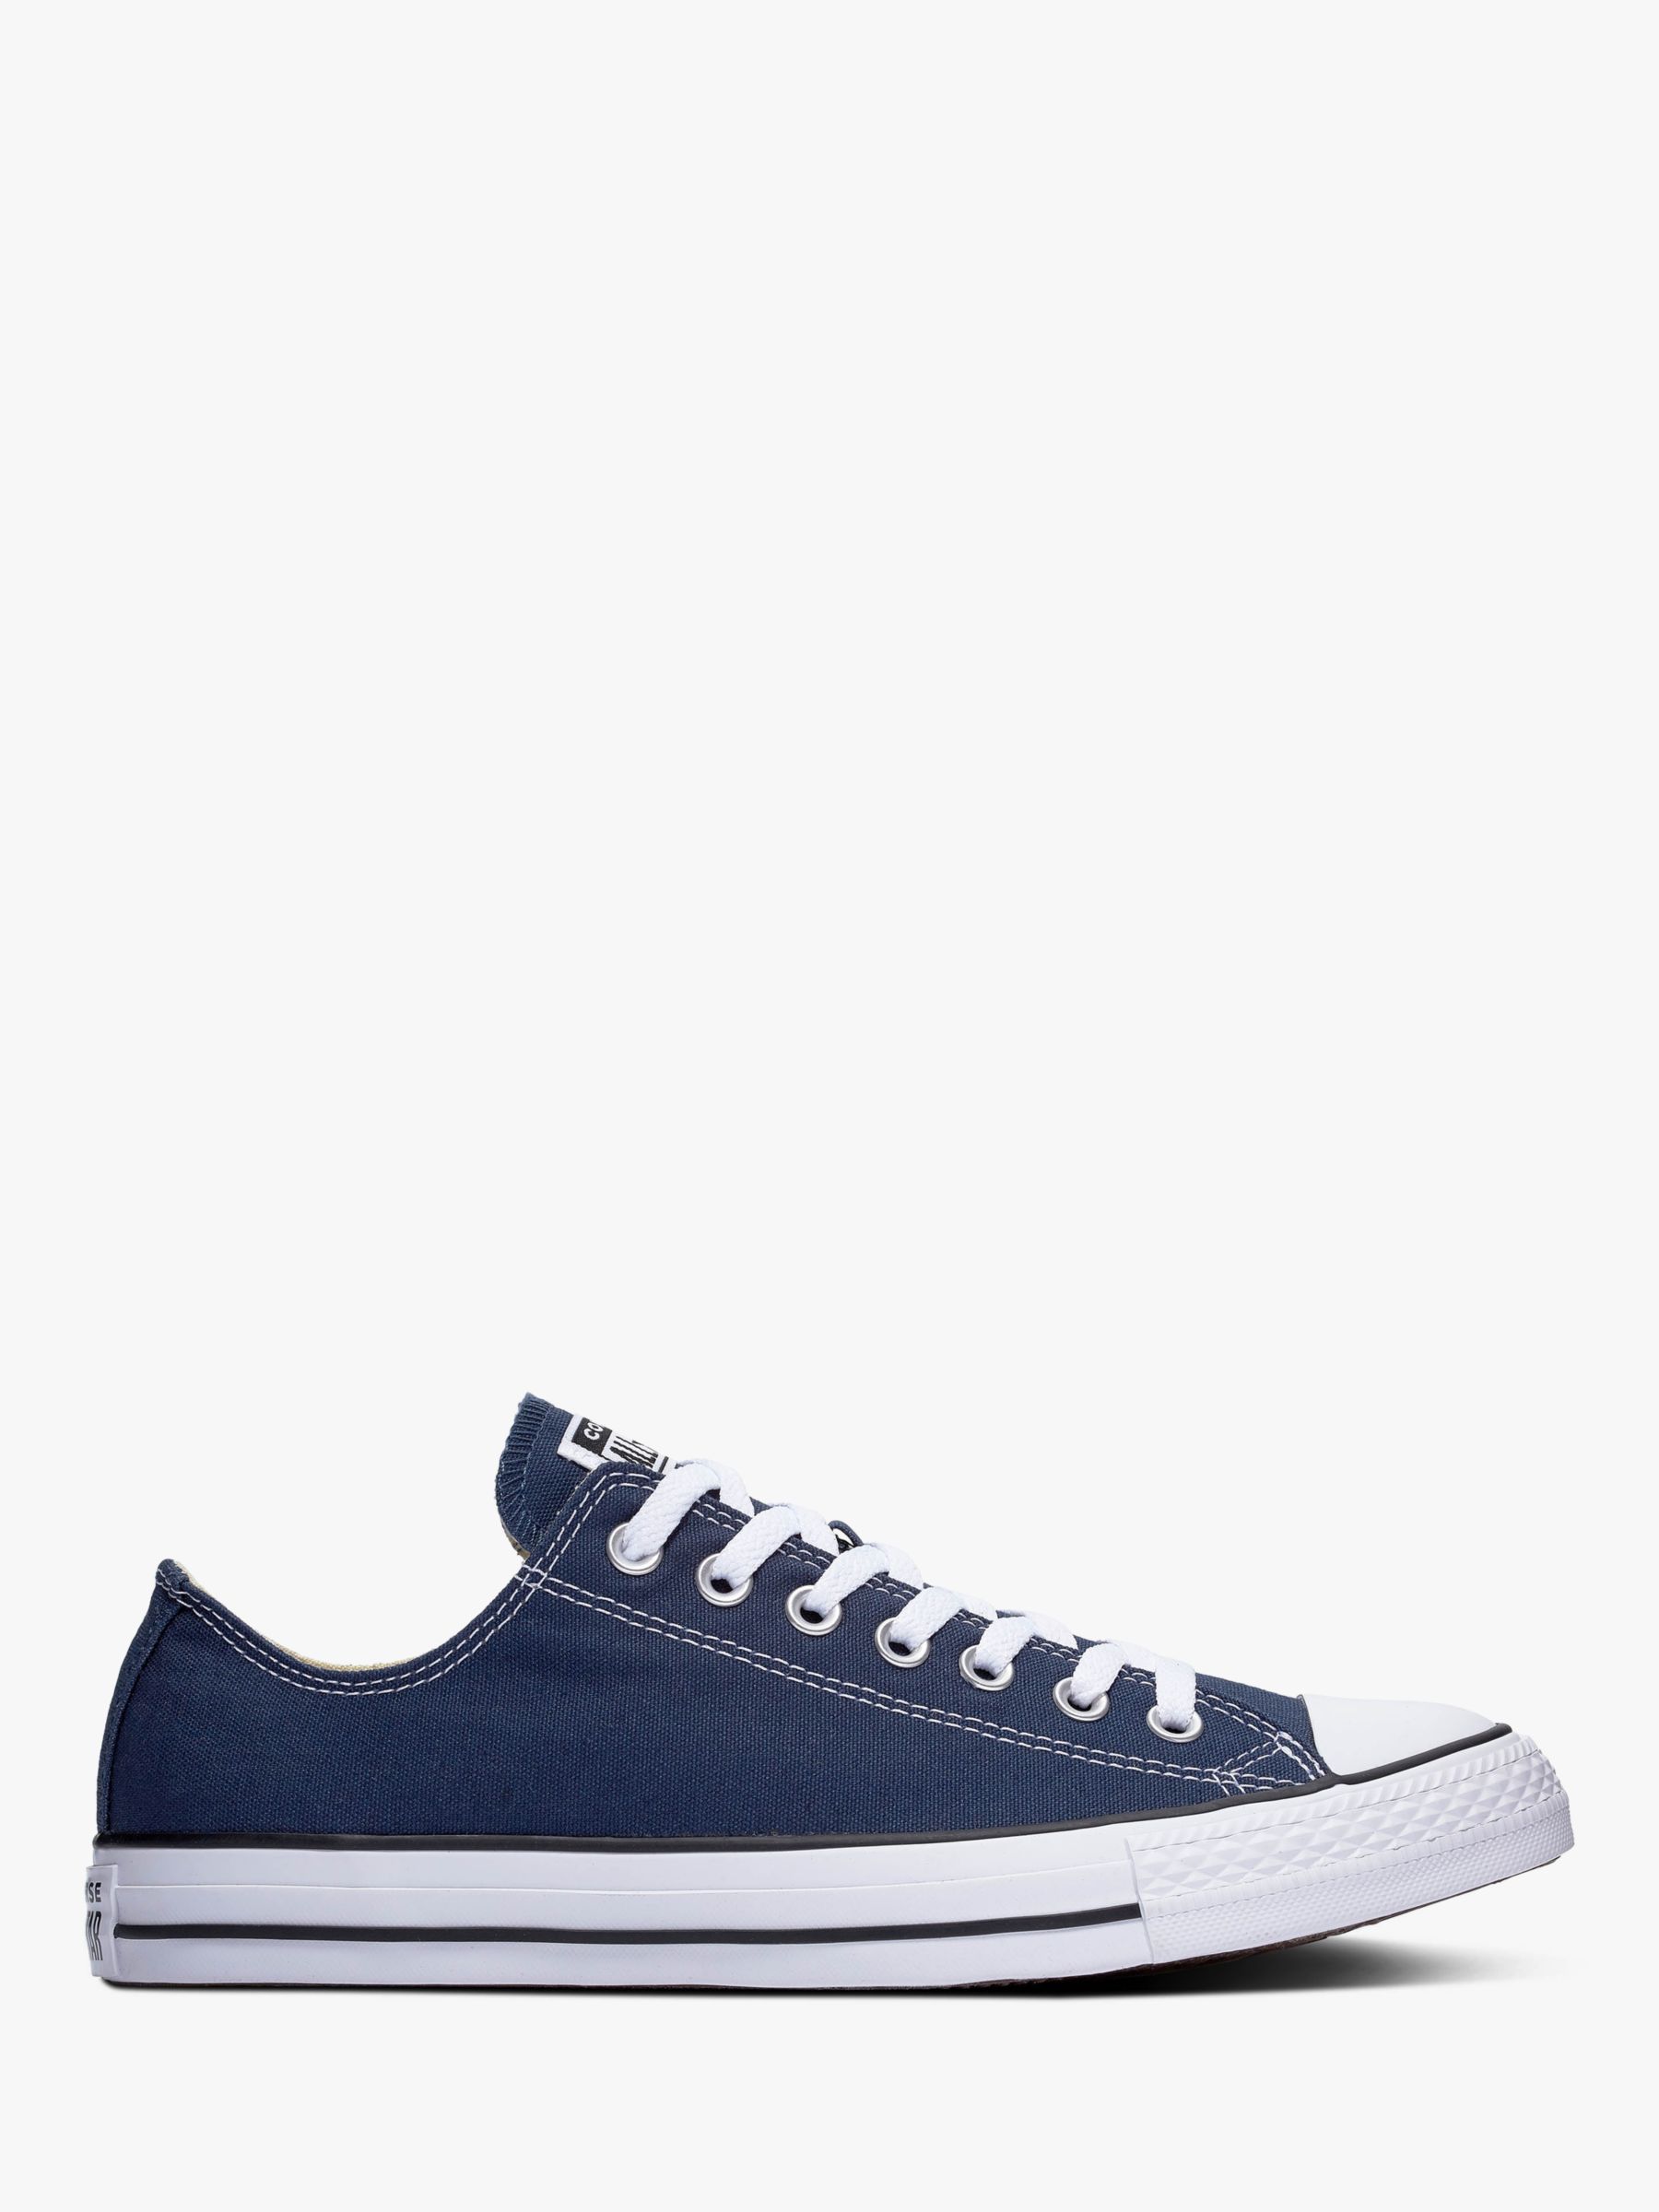 Converse Chuck Taylor All Star Canvas Ox Low Top Trainers 3449